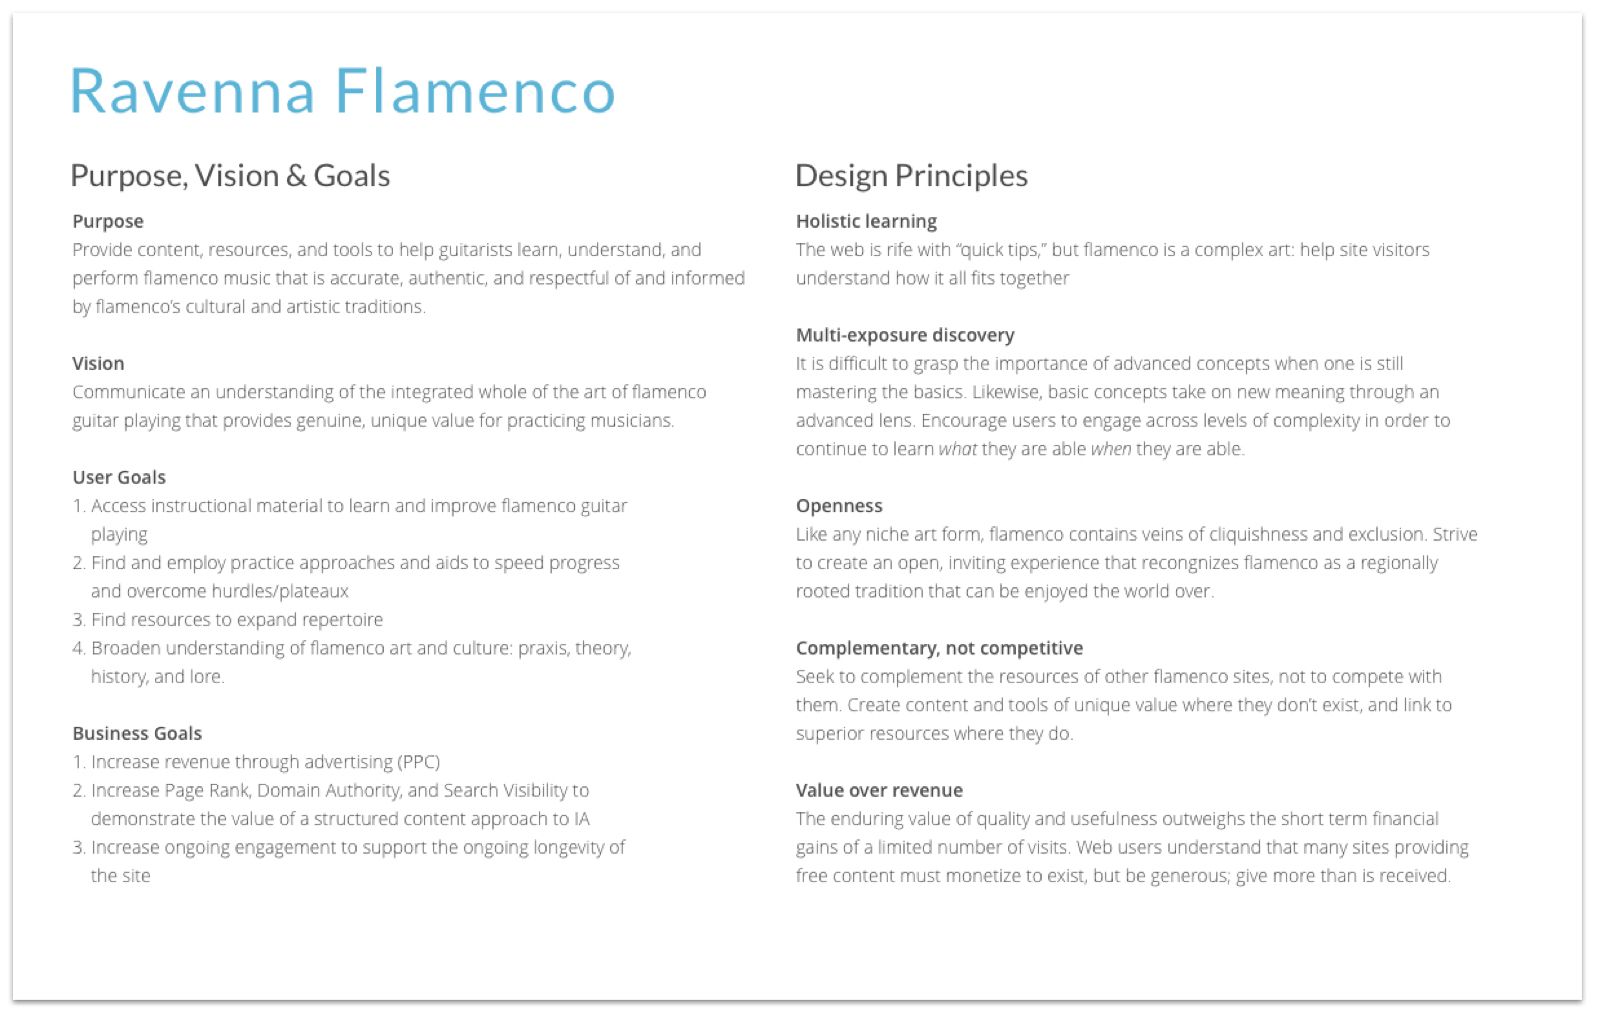 Purpose, vision, and design principles for Ravenna Flamenco. Purpose: Provide content, resources, and tools to help guitarists learn, understand, and perform flamenco music that is accurate, authentic, and respectful of and informed by flamenco’s cultural and artistic traditions. Vision: Communicate an understanding of the integrated whole of the art of flamenco guitar playing that provides genuine, unique value for practicing musicians. Design principles: holistic learning , Multi-exposure discovery, Openness, Complementary, not competitive, Value over revenue